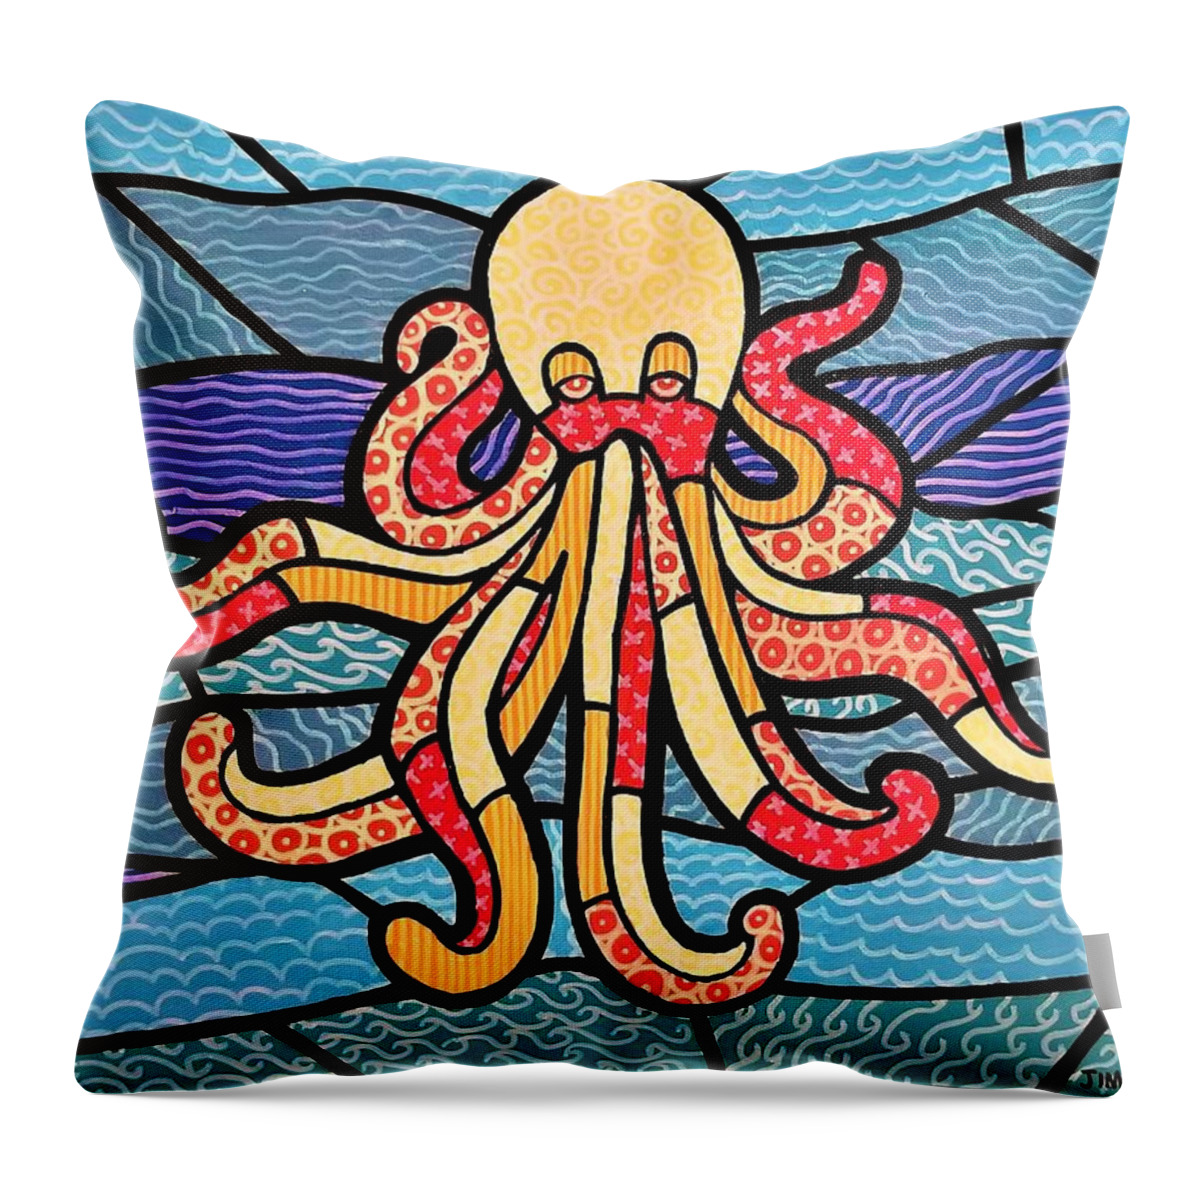 Octopus Throw Pillow featuring the painting Quilted Octopus by Jim Harris